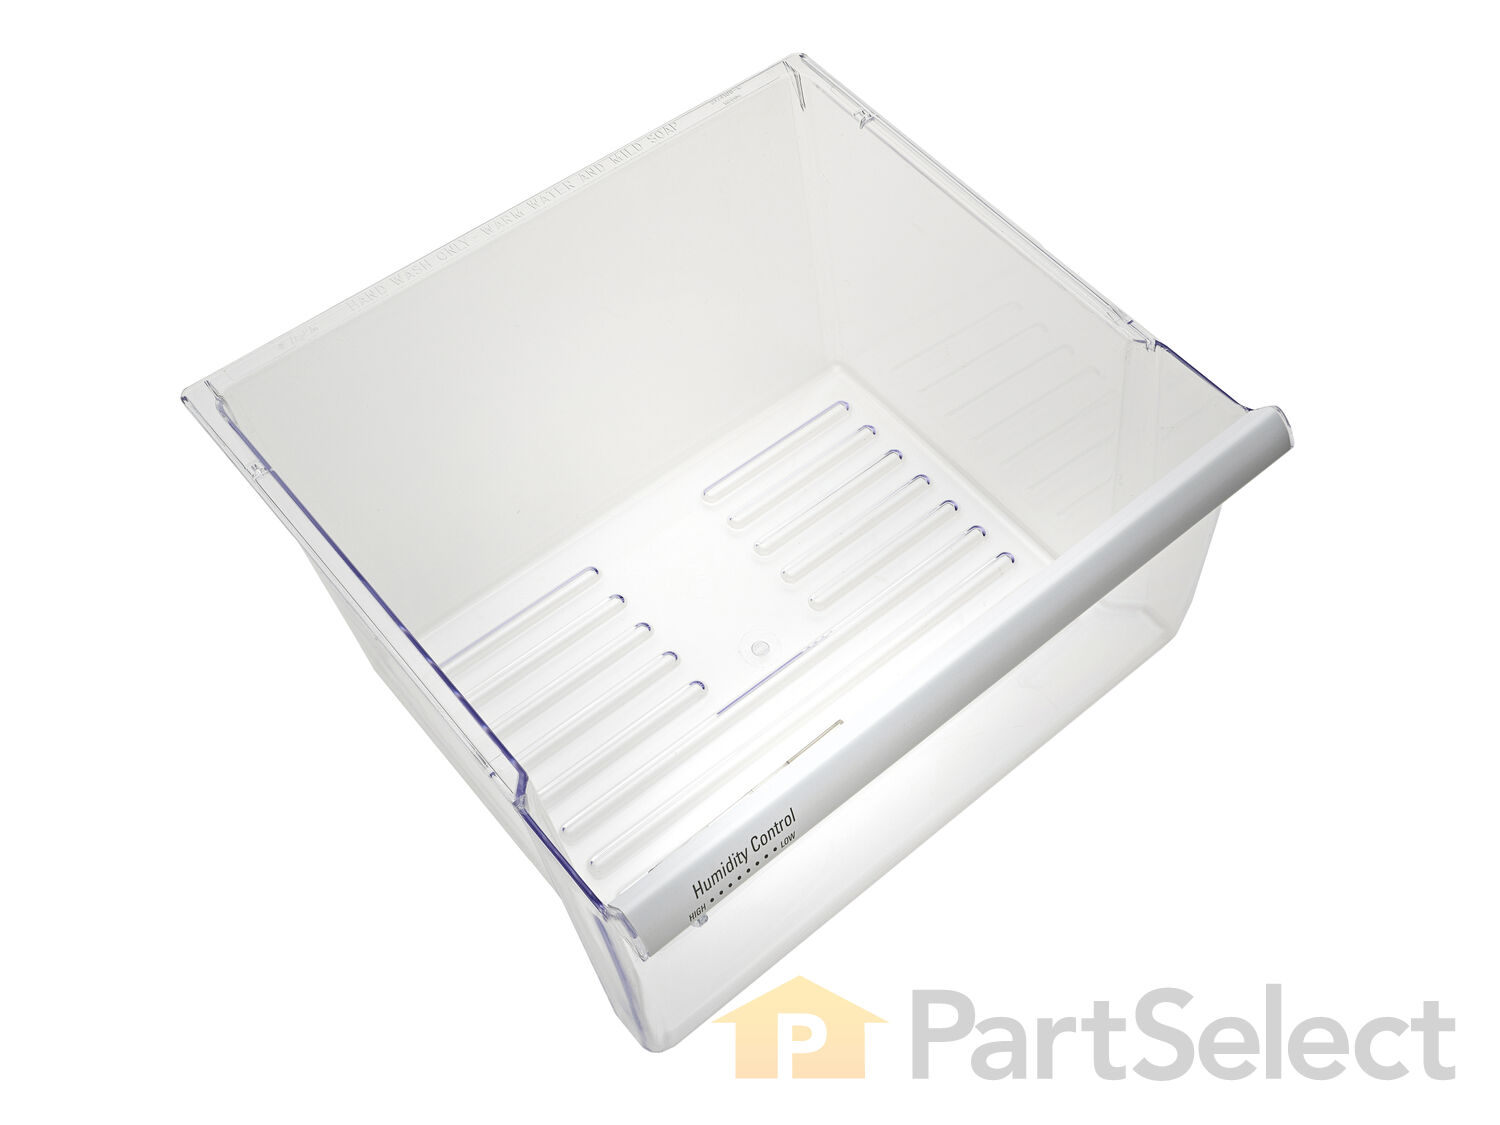 PS890591 Refrigerator Crisper Drawer with Humidity Control WP2188656